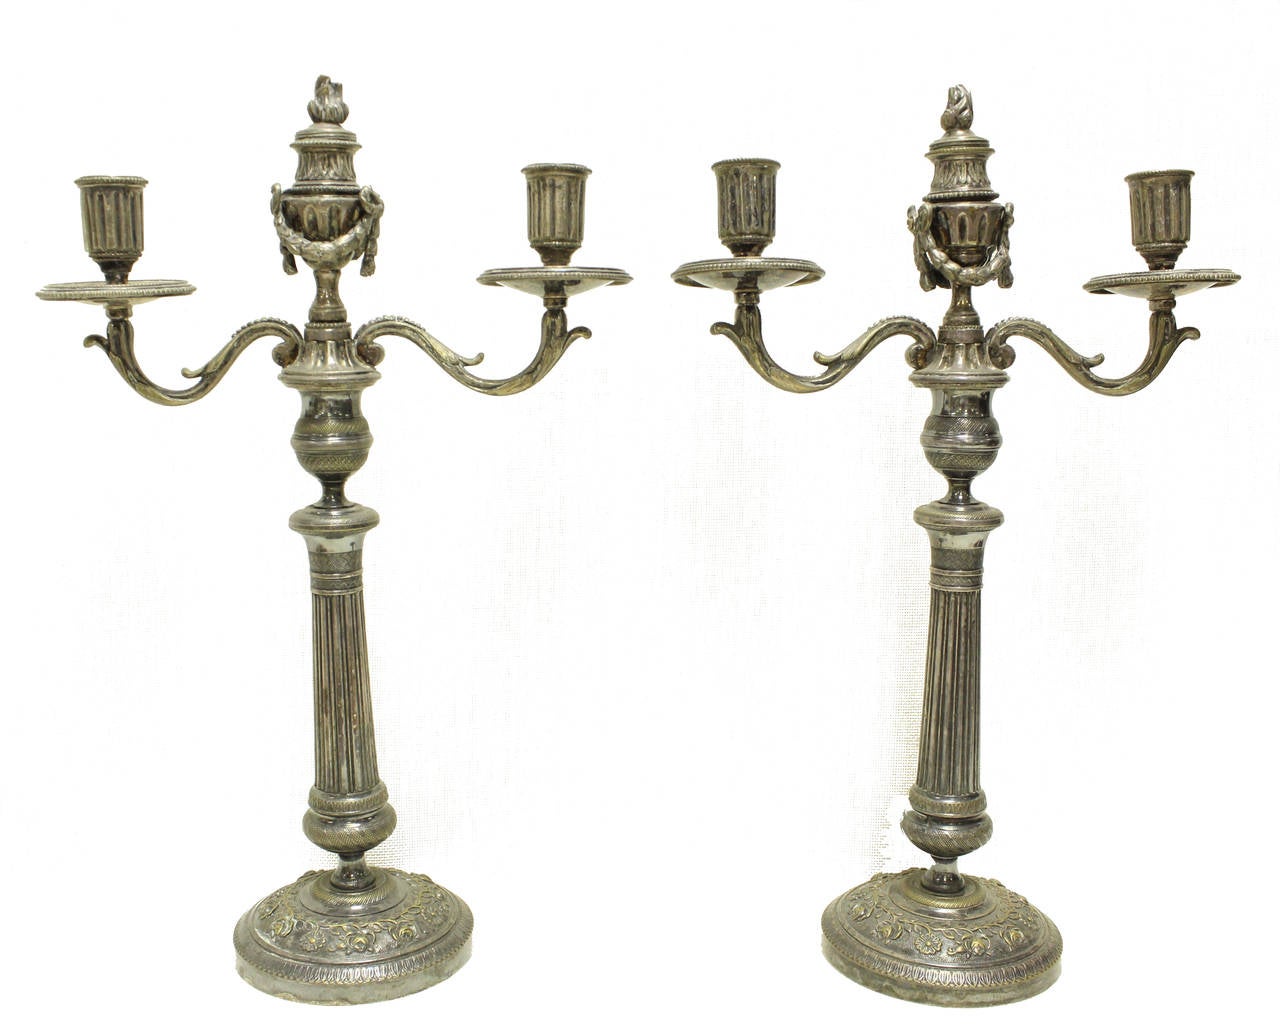 Stunning pair of silver plated candelabras with detailed foliage, reeded center, flame top and foliate swag.